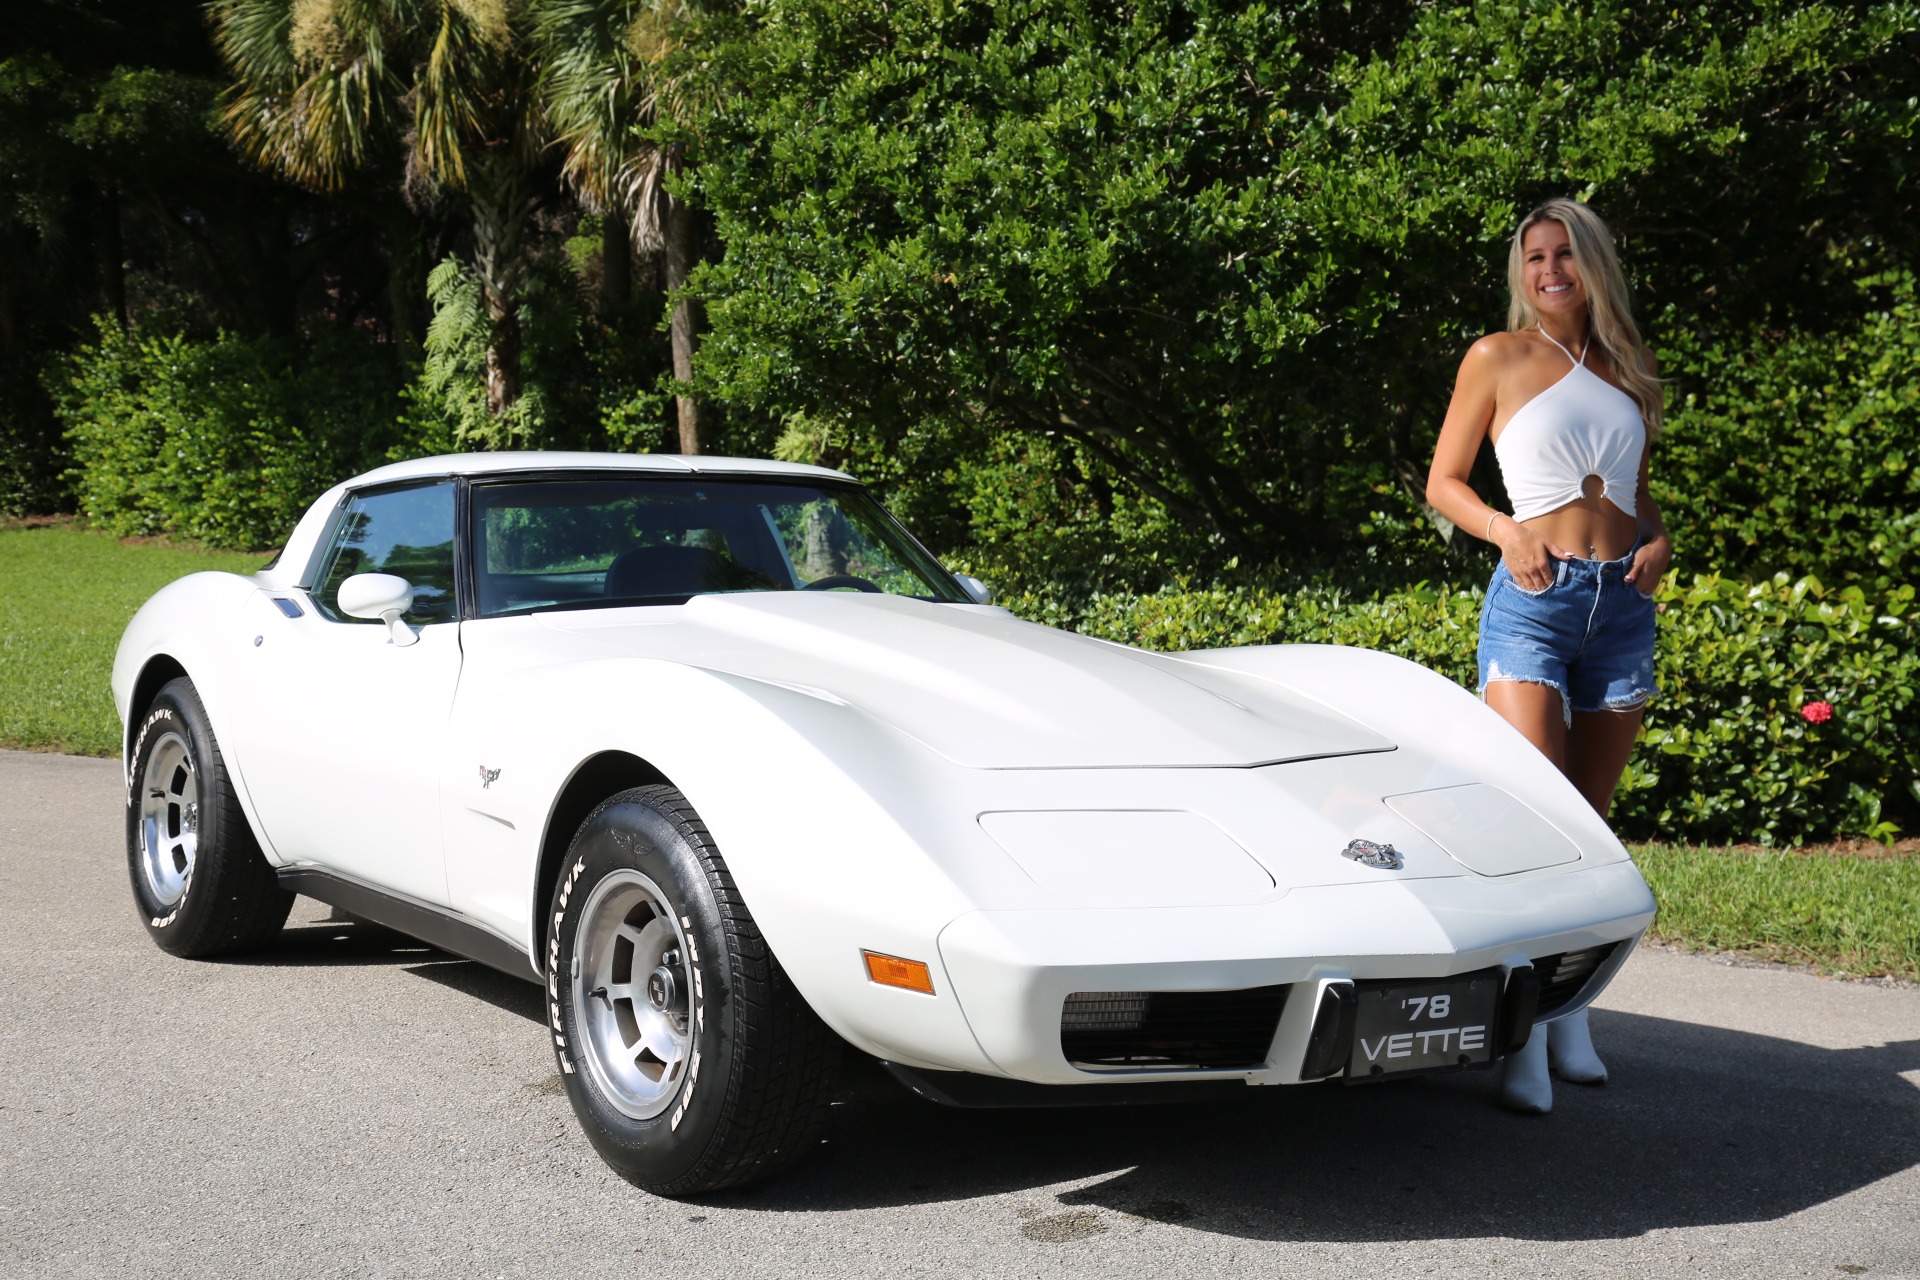 Used 1978 Chevrolet Corvette Anniversary Edition for sale $18,000 at Muscle Cars for Sale Inc. in Fort Myers FL 33912 6